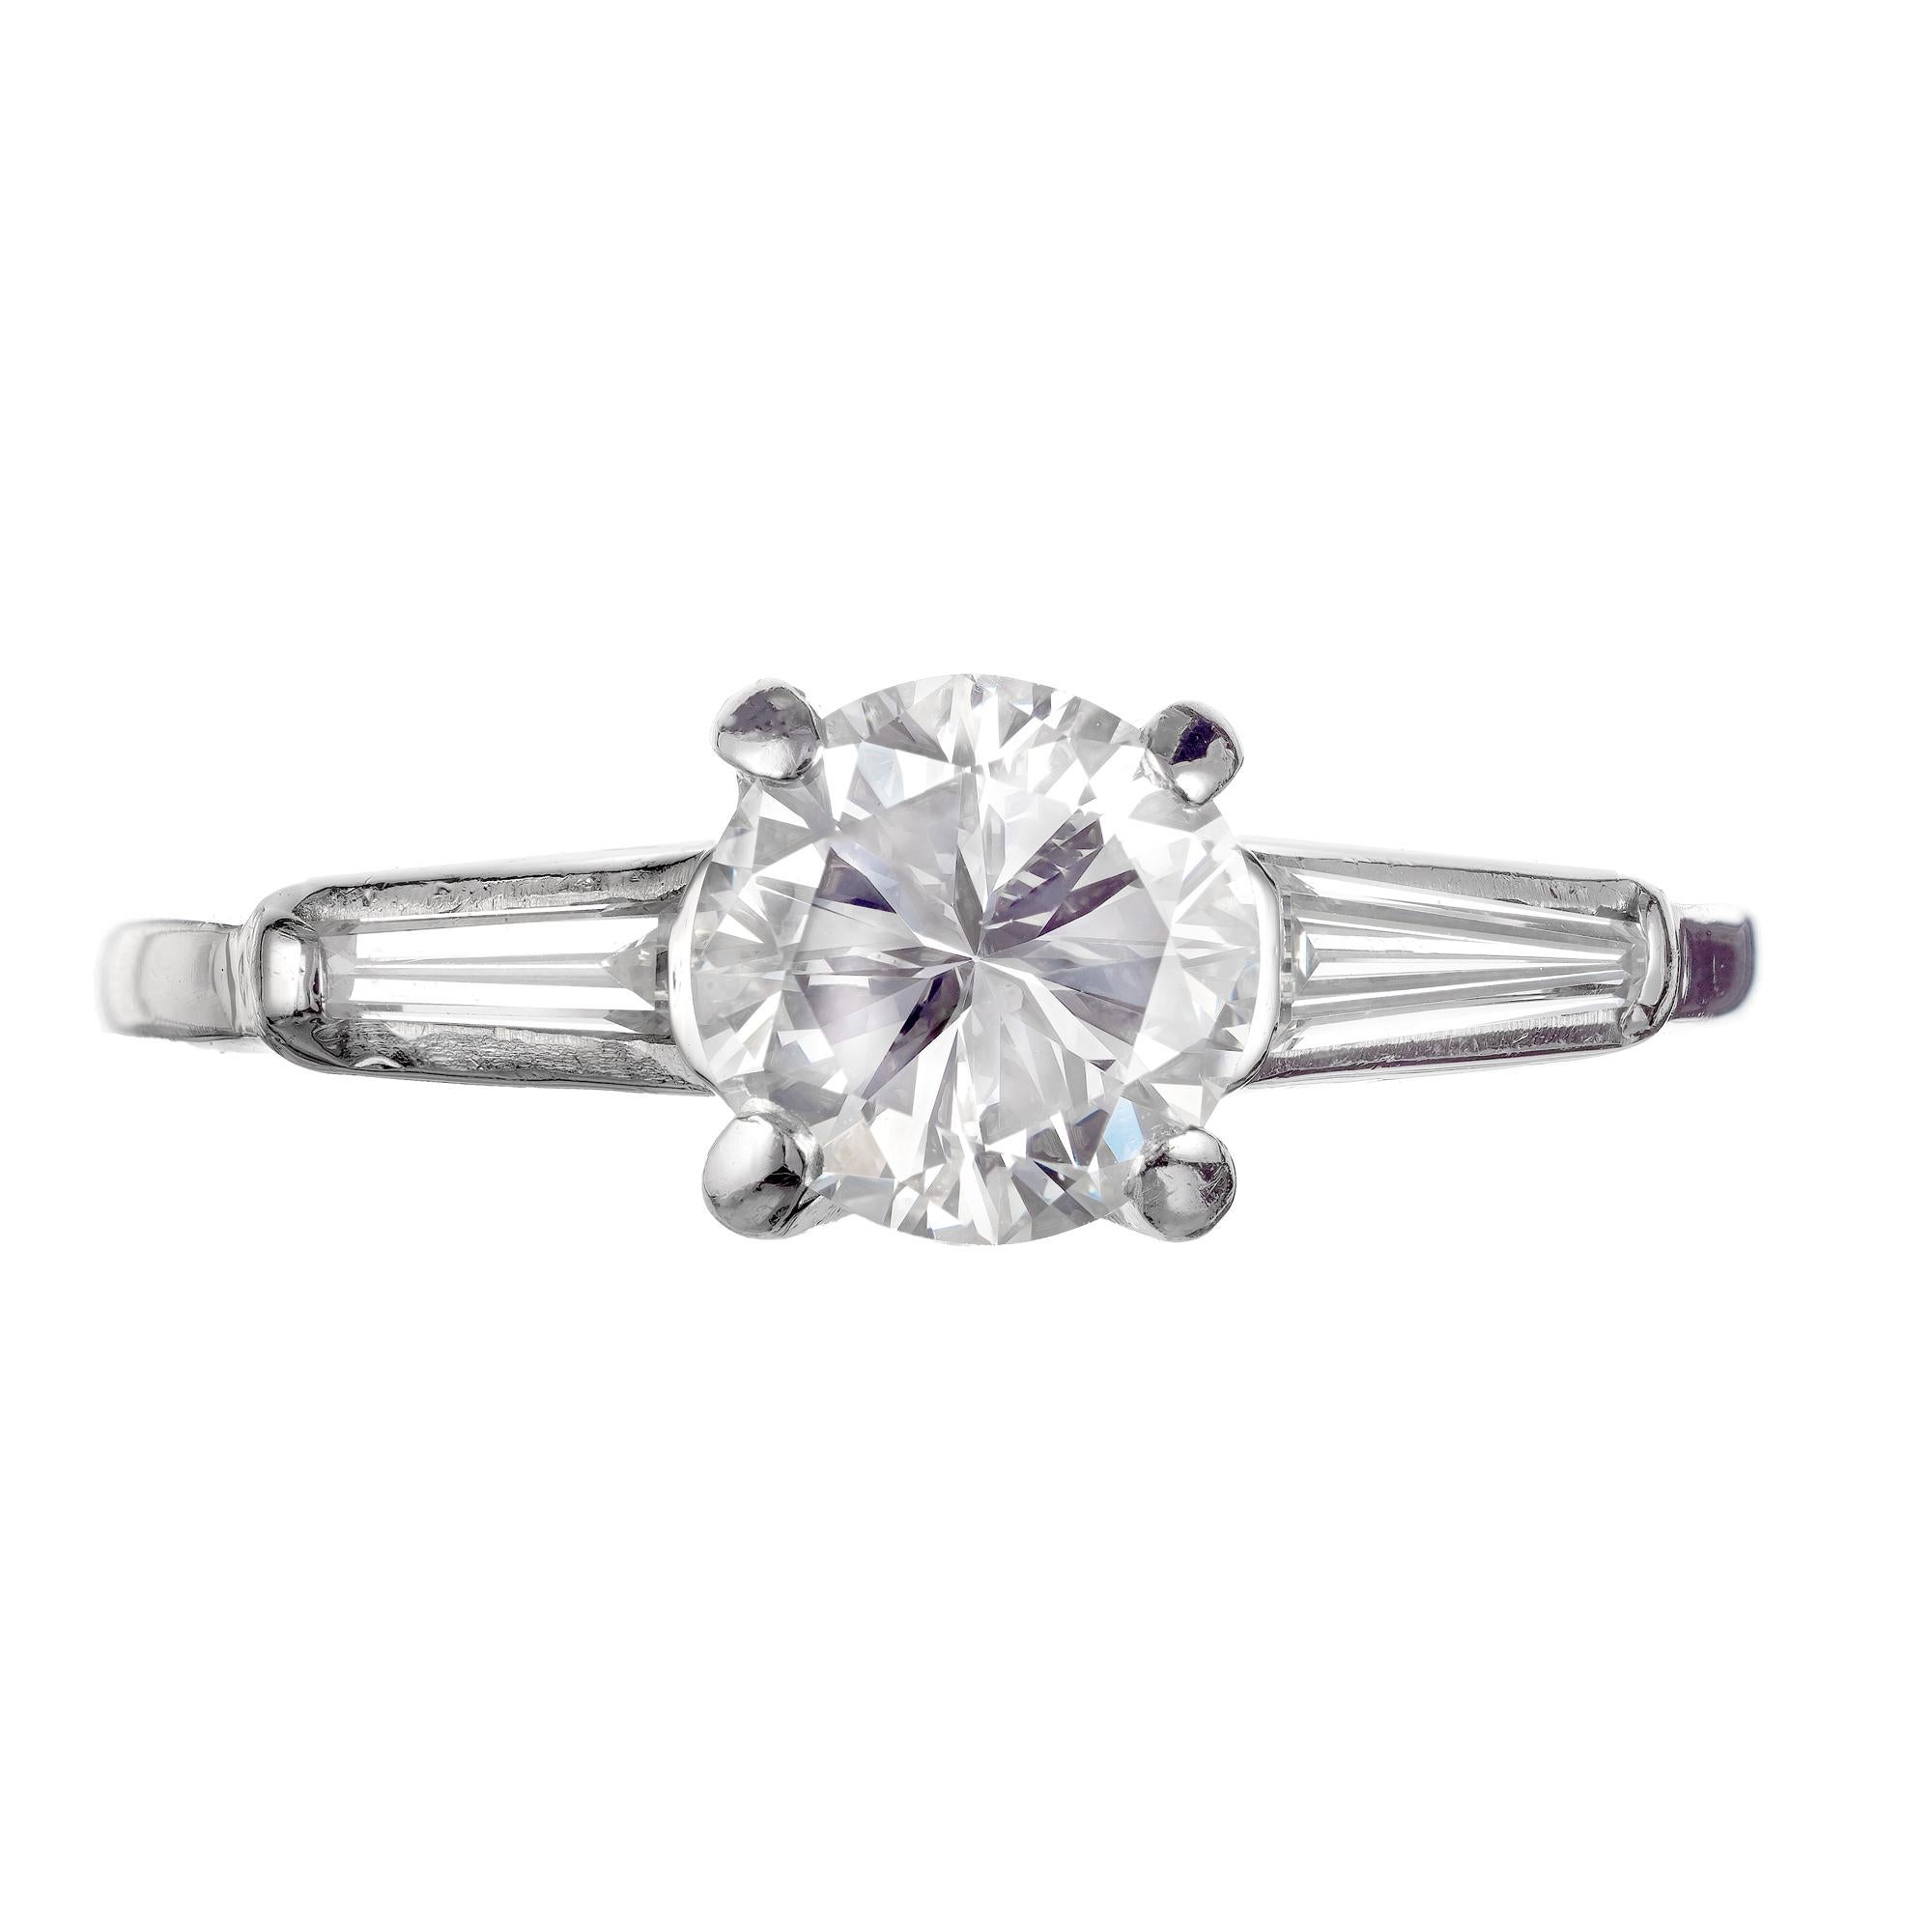 Mid-Century Transitional brilliant cut round center diamond engagement ring. Set in platinum with two tapered baguette side diamonds in a three-stone setting. 

1 transitional cut round diamond, approx. total weight 1.03cts, F-G, VS1, Depth: 62.9% 